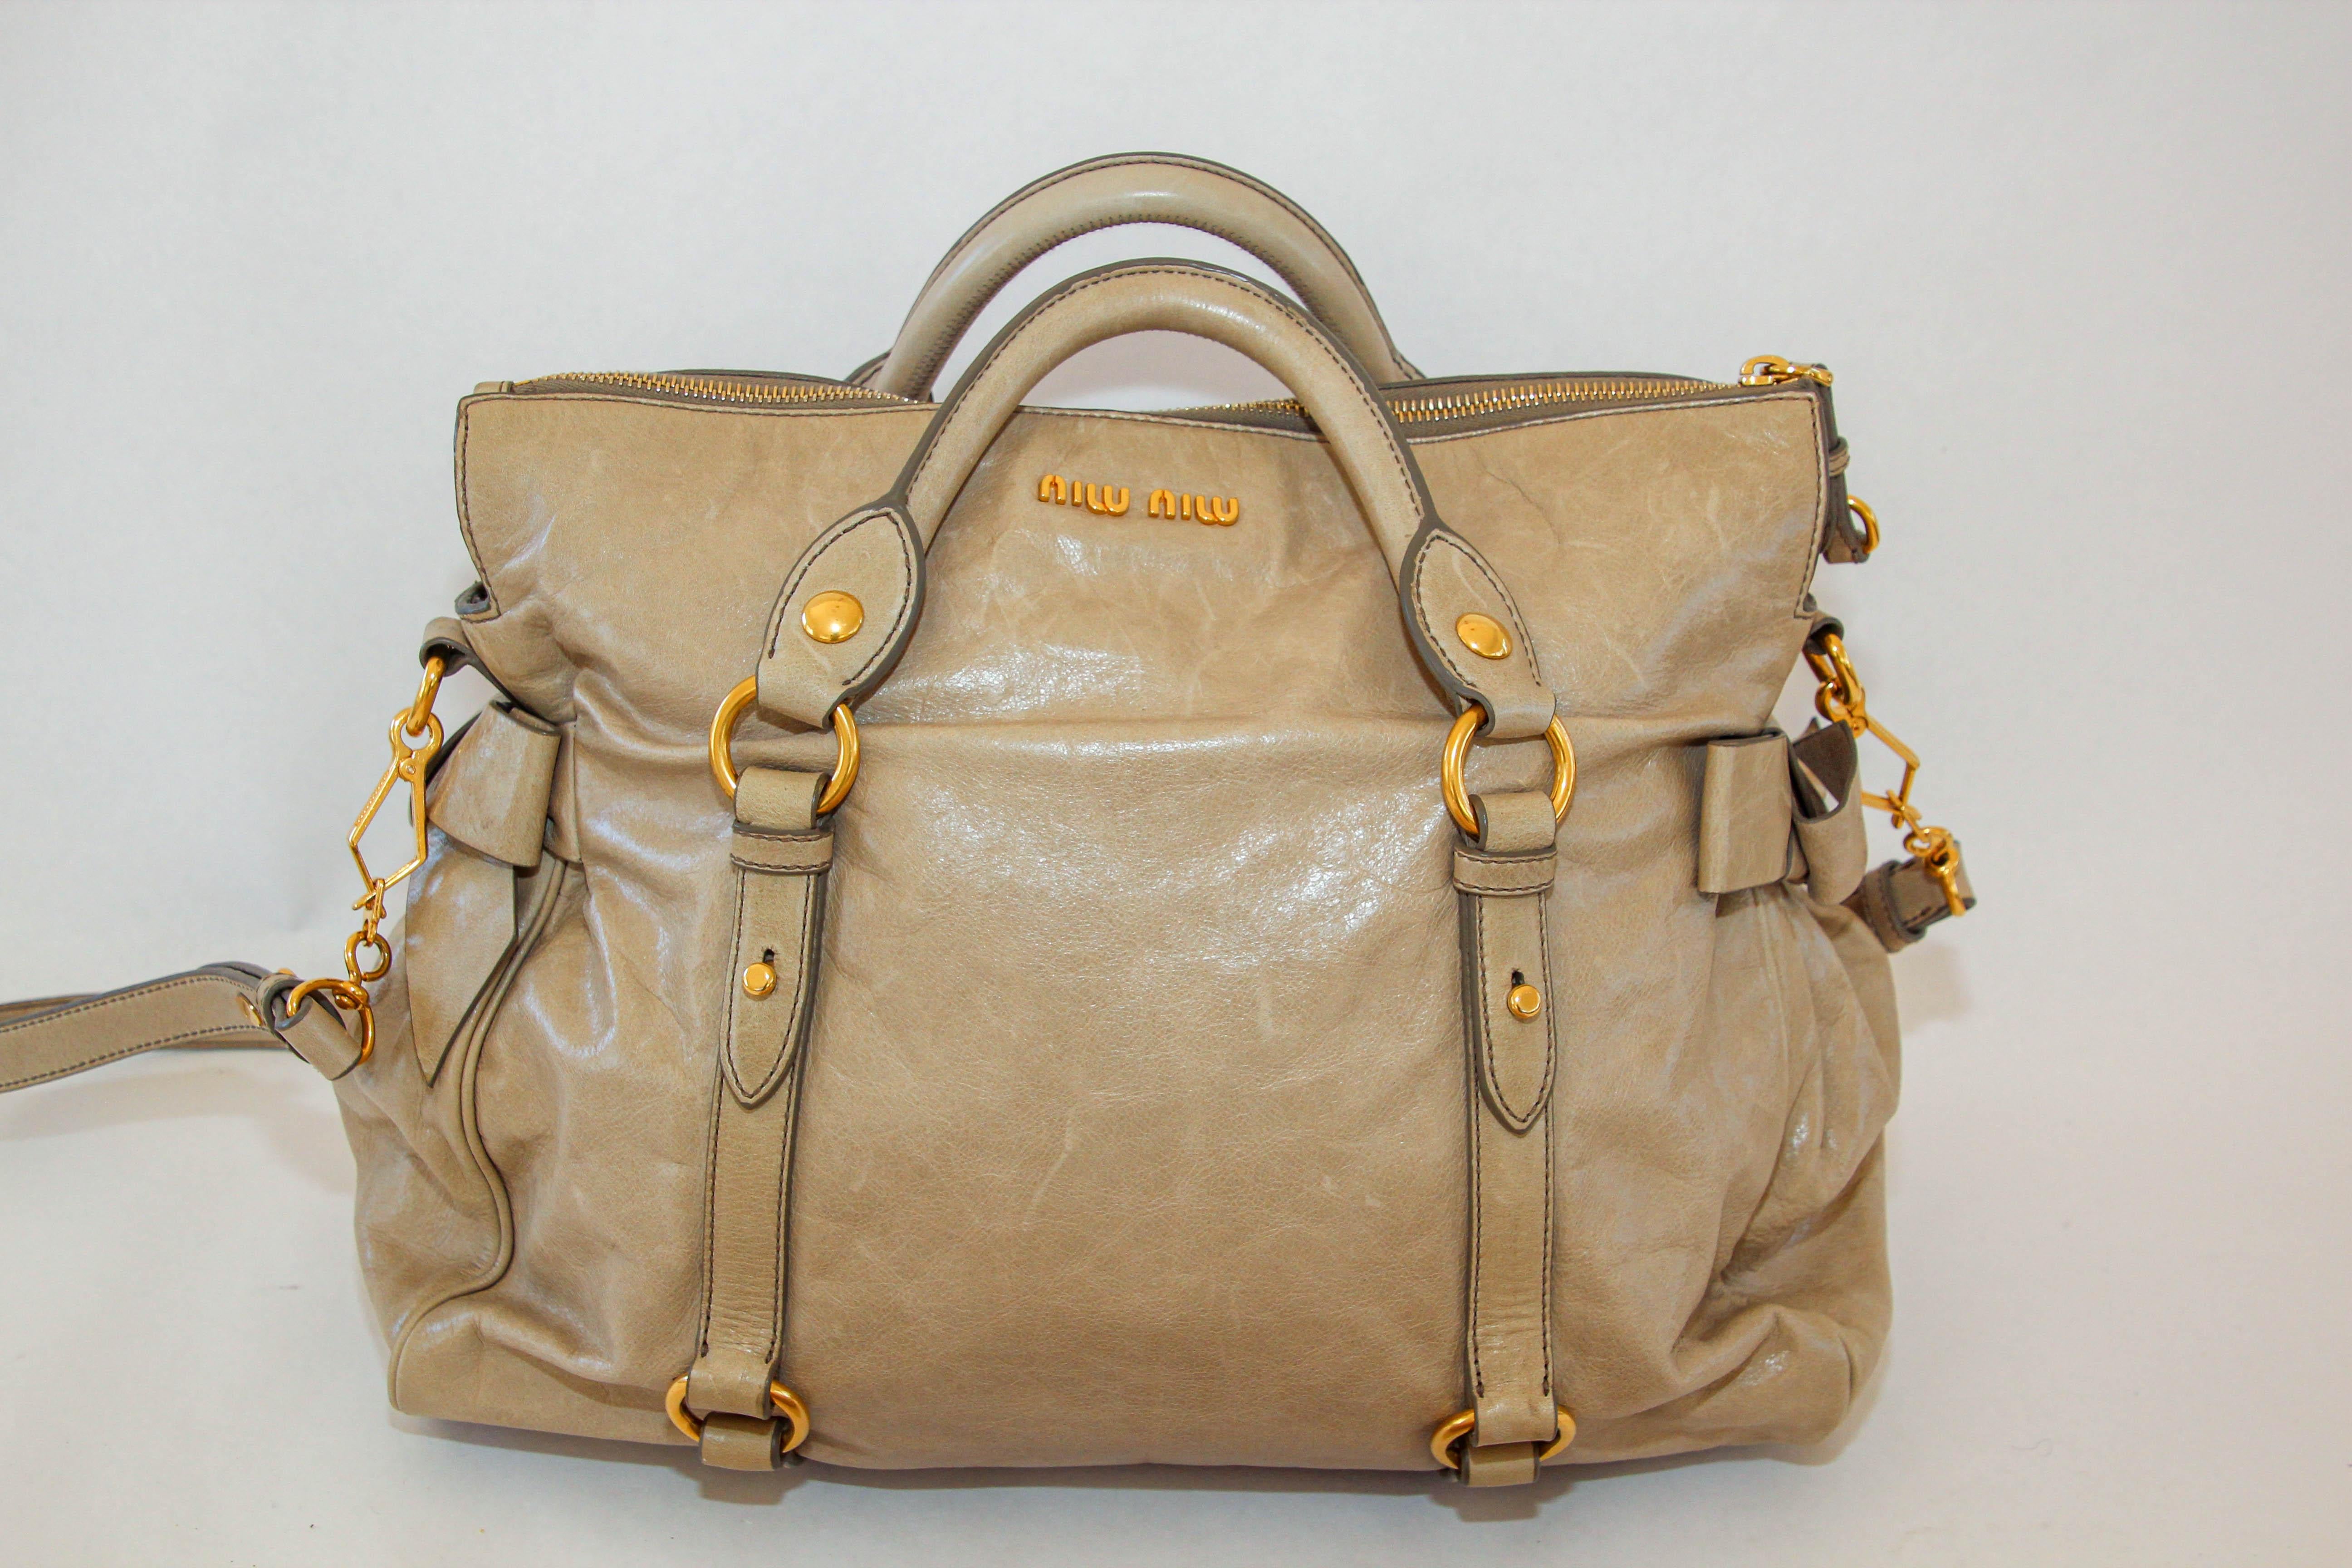 MIU MIU Beige Vitello Lux Bow Leather Hand Bag Satchel Tote In Good Condition For Sale In North Hollywood, CA